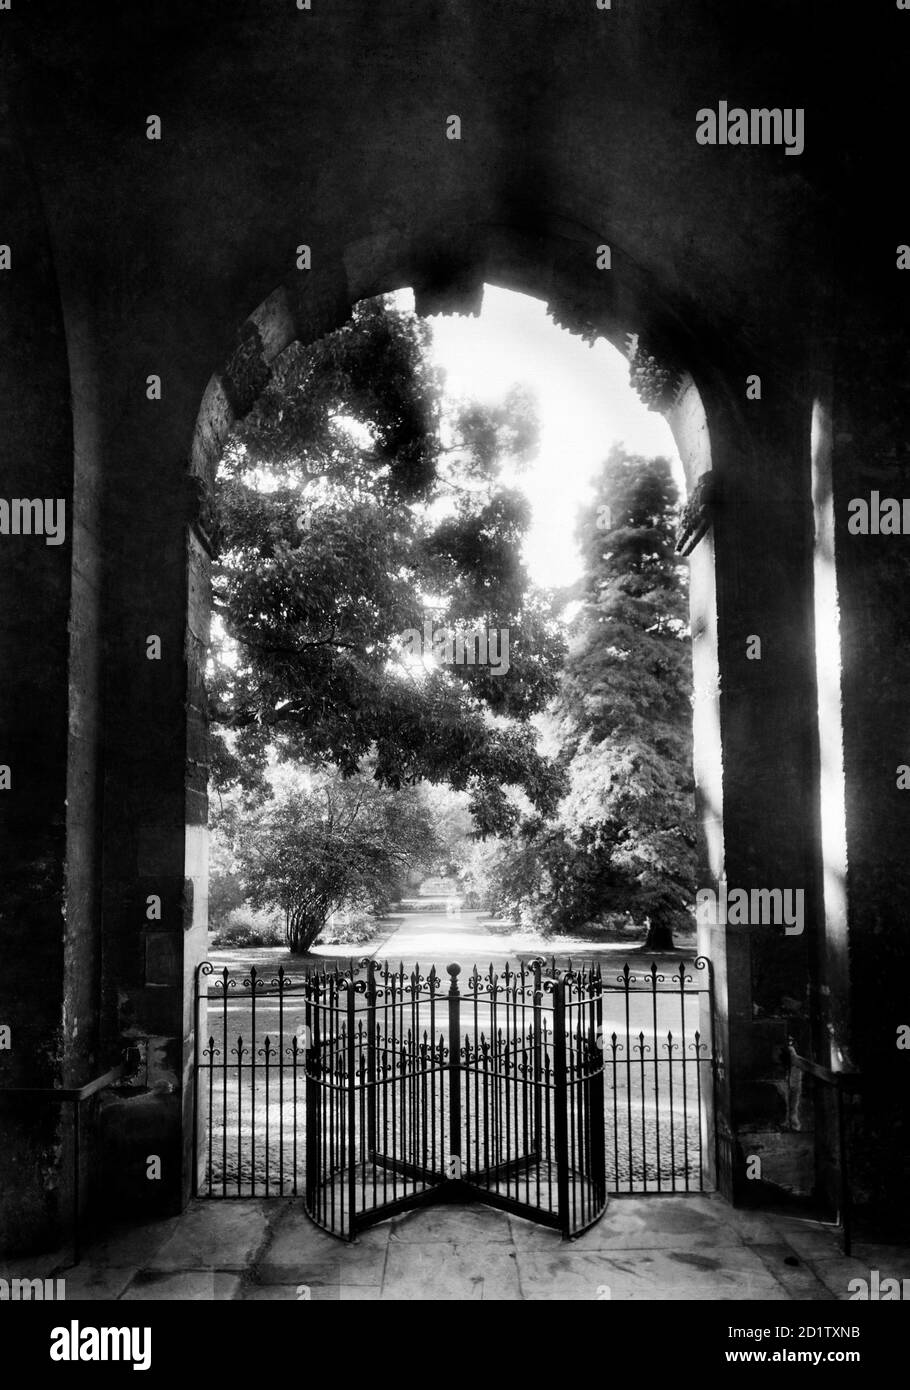 BOTANIC GARDEN, High Street, Oxford, Oxfordshire. Looking through the main gate, built in 1632-3 by Nicholas Stone, along a leafy avenue. The garden was first established as the Oxford Physic Garden by Henry Danvers in 1621. Photographed by Henry Taunt in 1911. Stock Photo